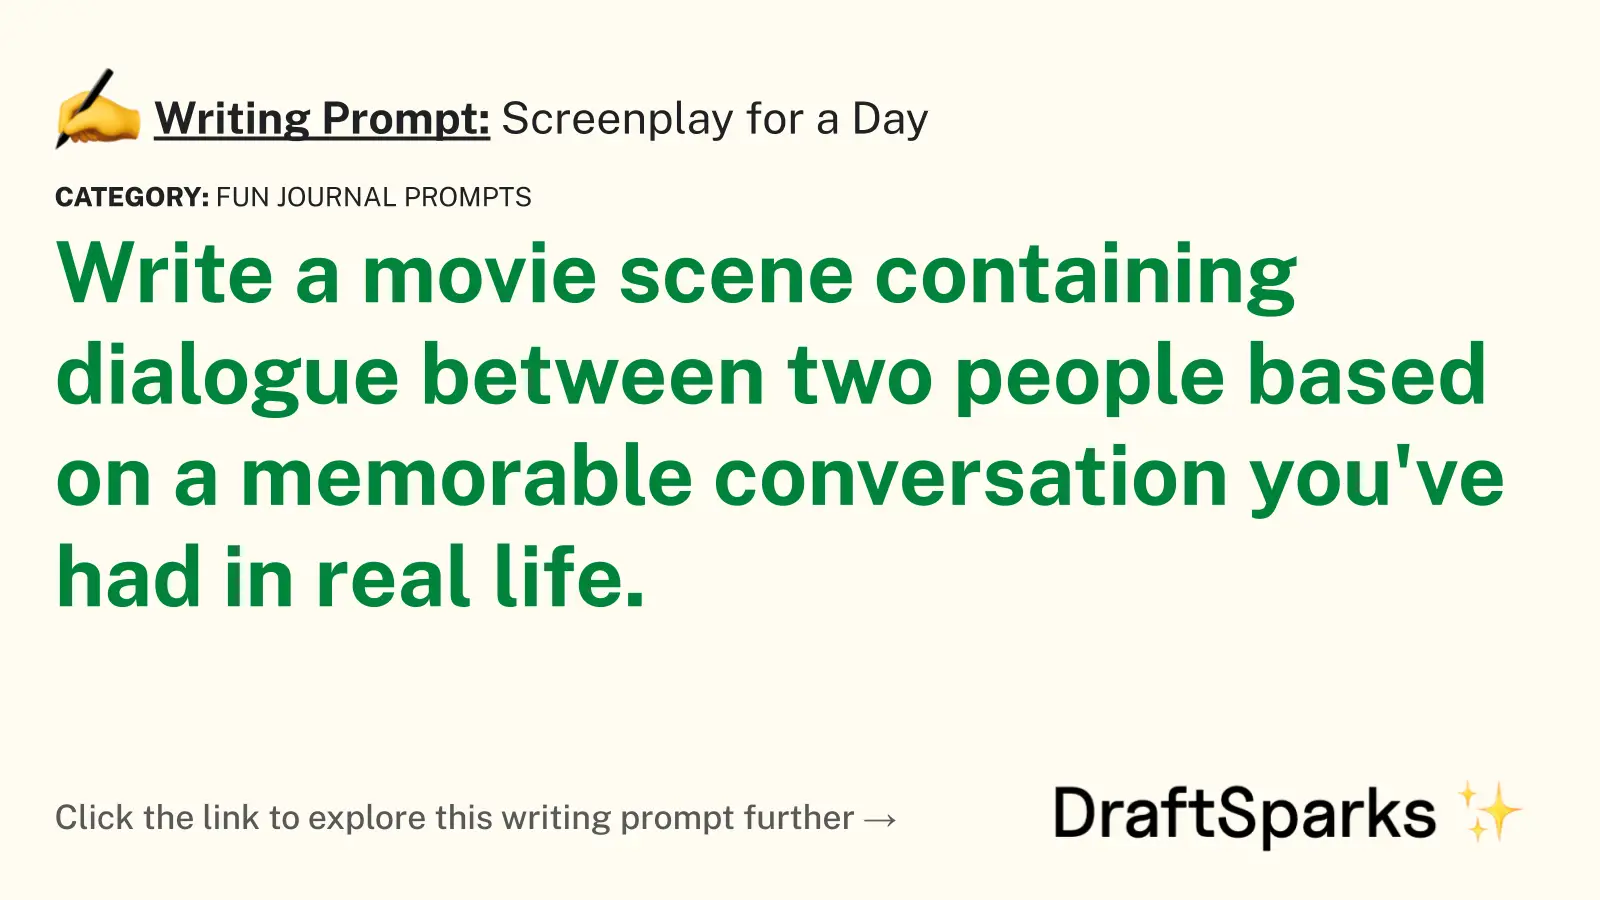 Screenplay for a Day